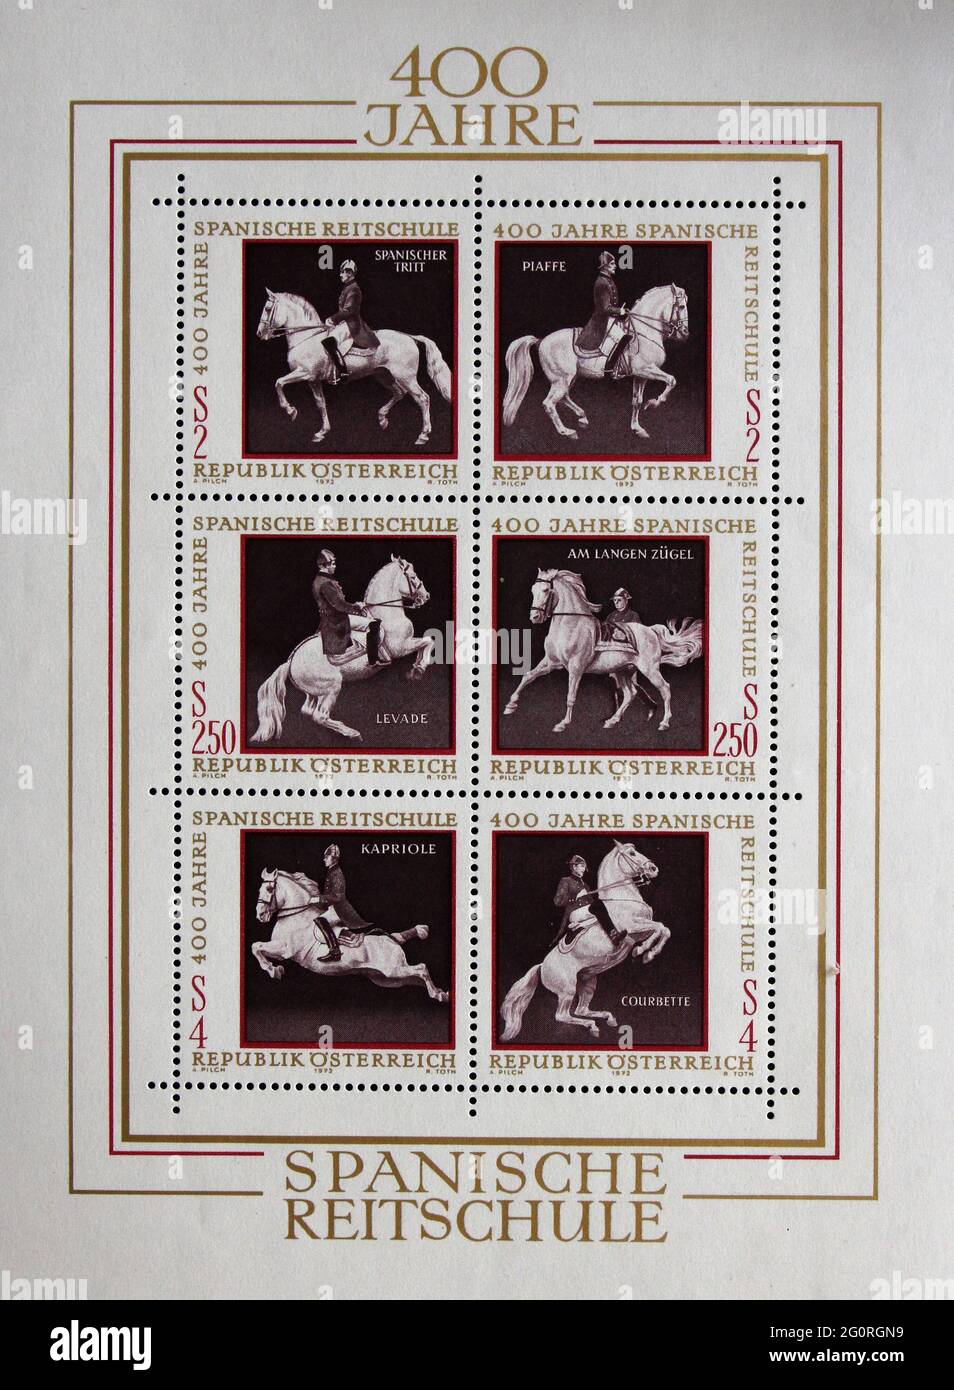 Stamps issued in Austria shows Equestrianism and horse riding, Spanish Horse Riding School in Vienna, circa 1972. Stock Photo